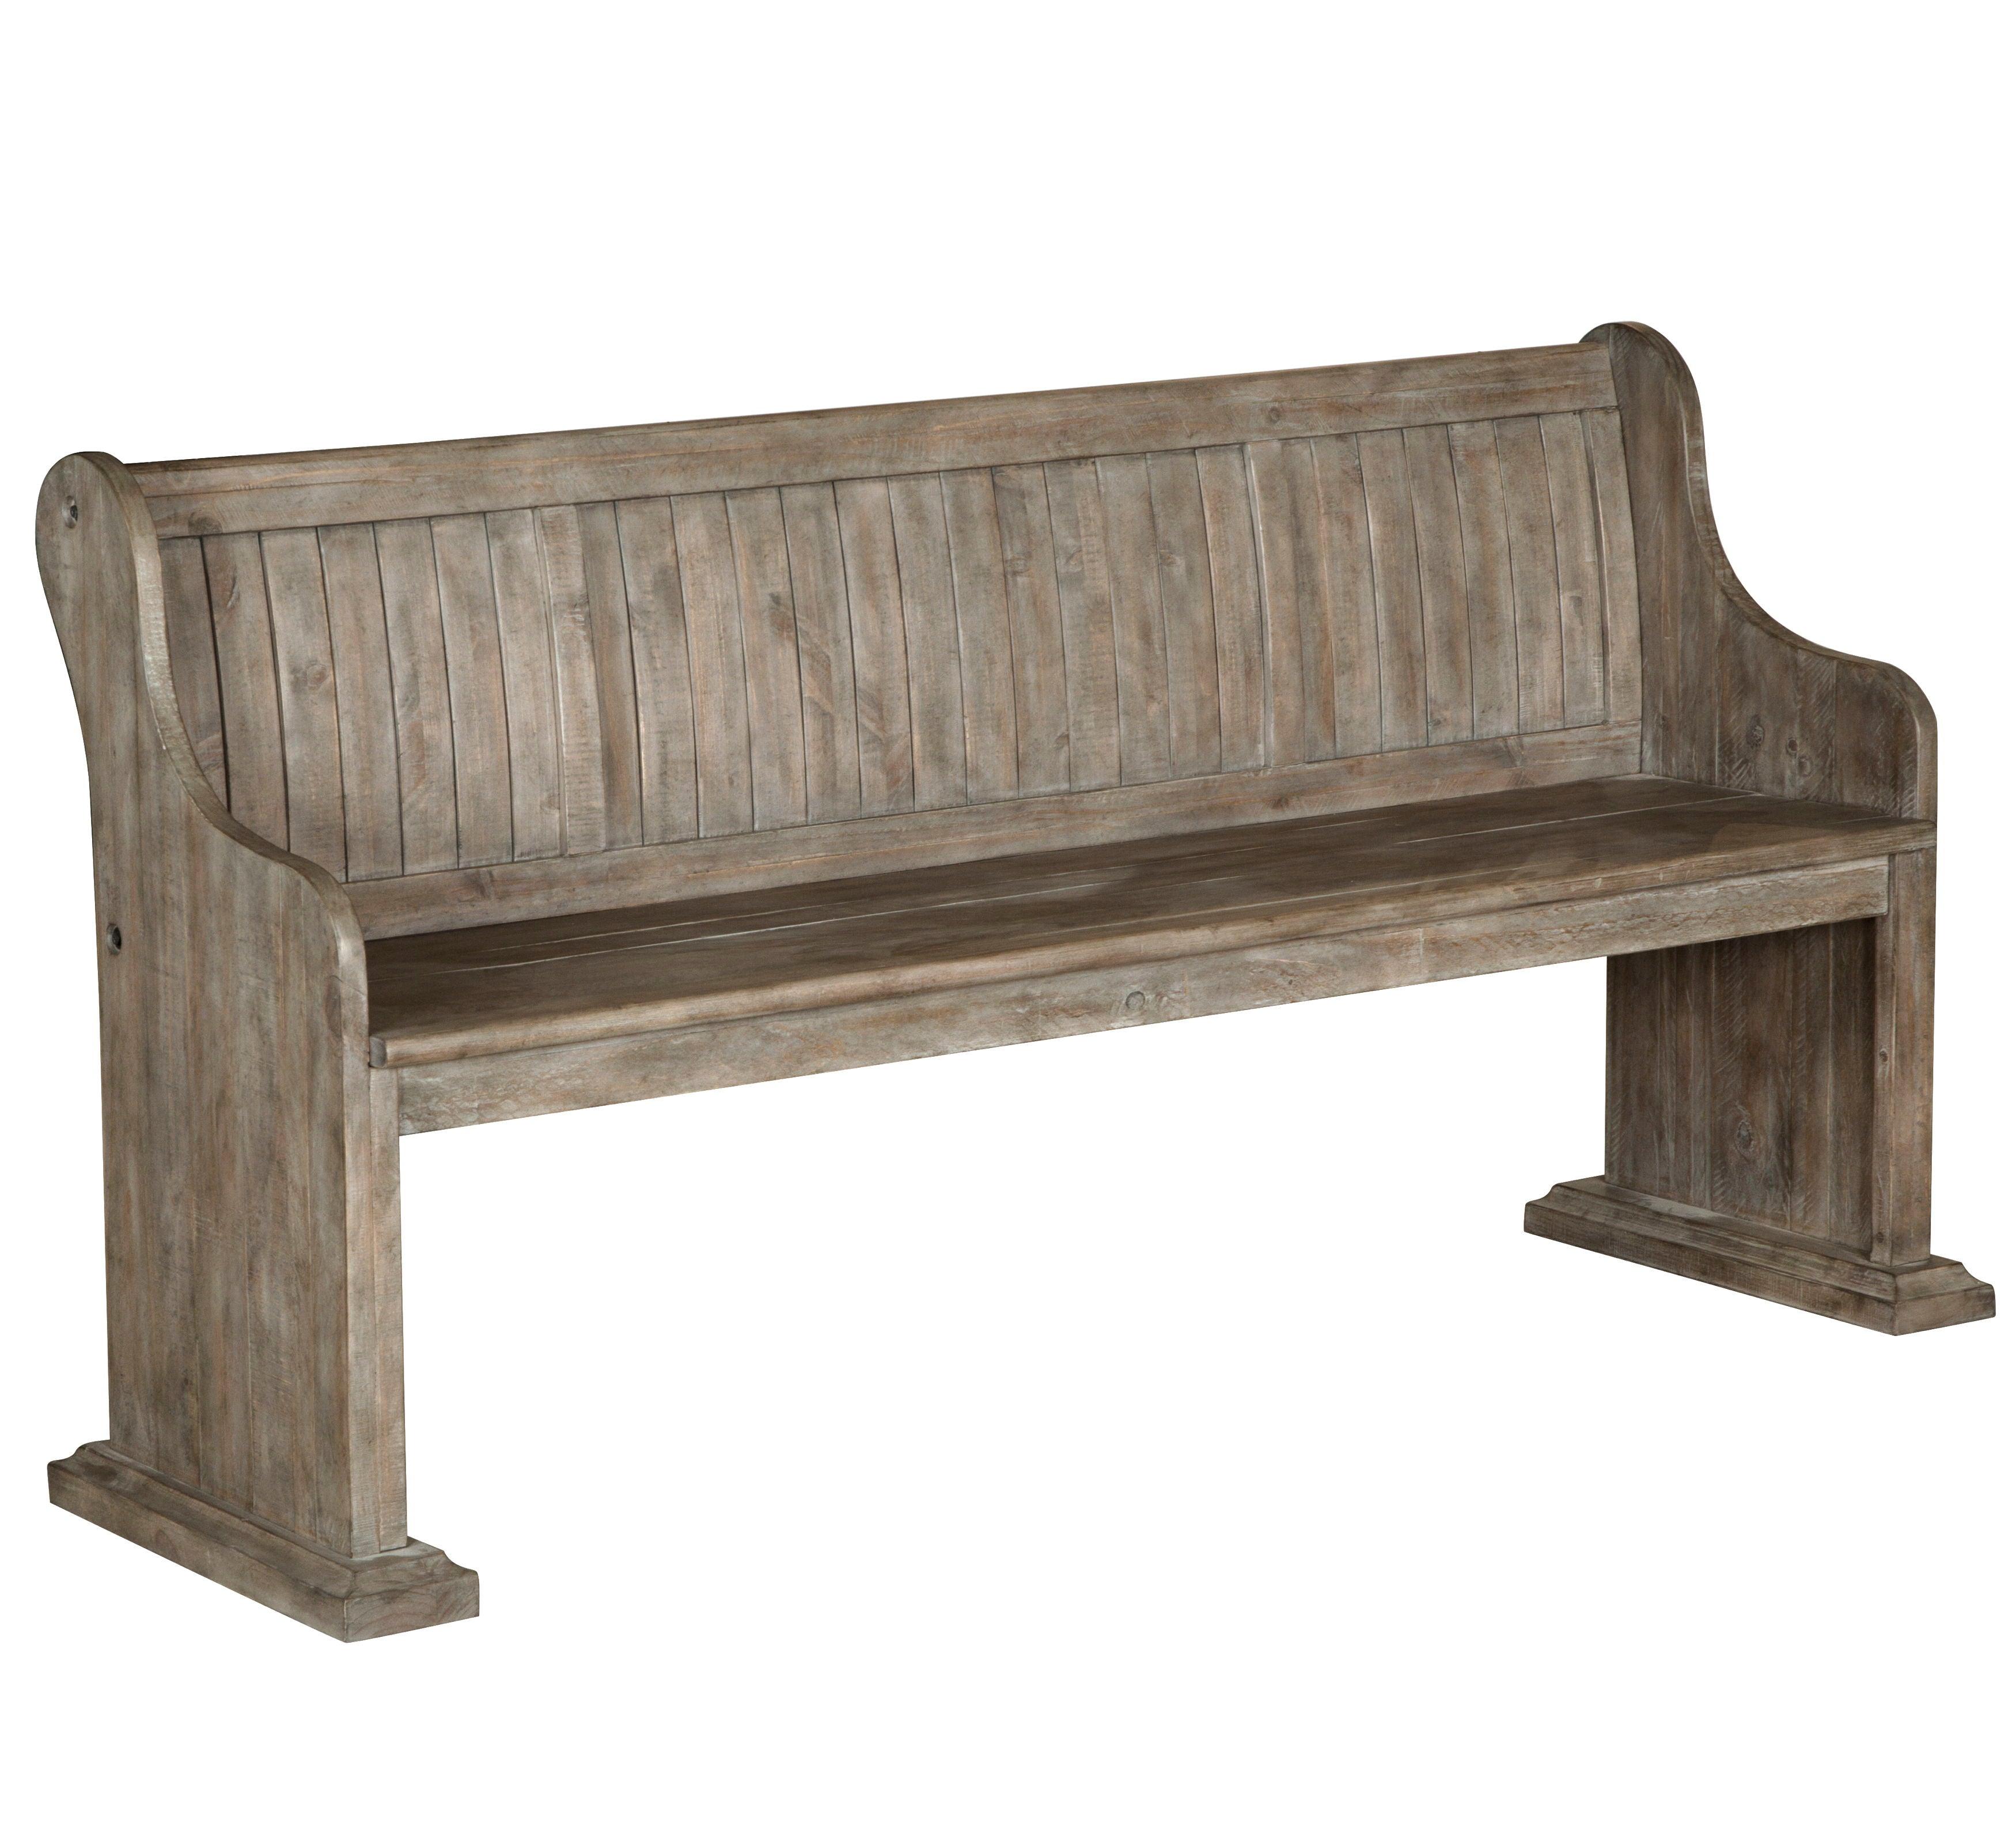 Magnussen Furniture - Tinley Park - Bench With Back - Dove Tail Grey - 5th Avenue Furniture